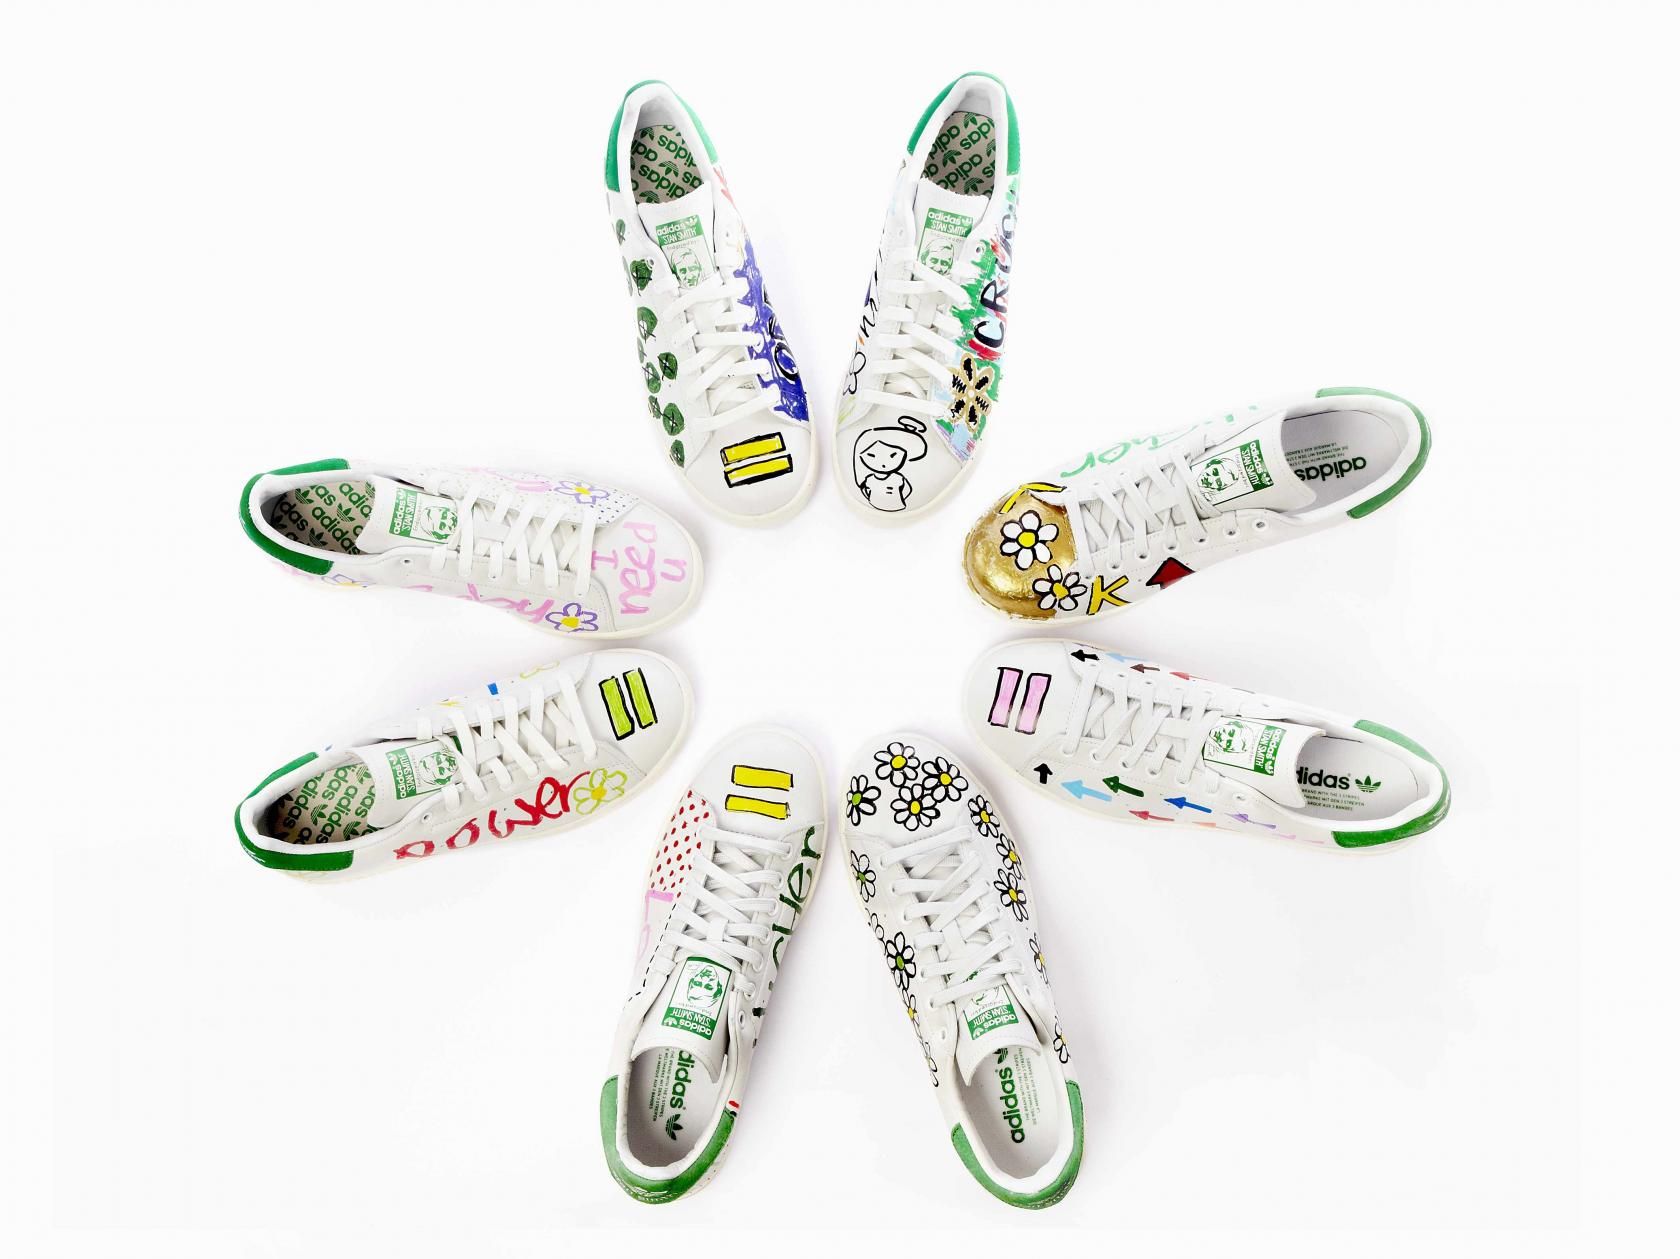 Originals Smith Hand Painted by Pharrell Williams - Colette Paris